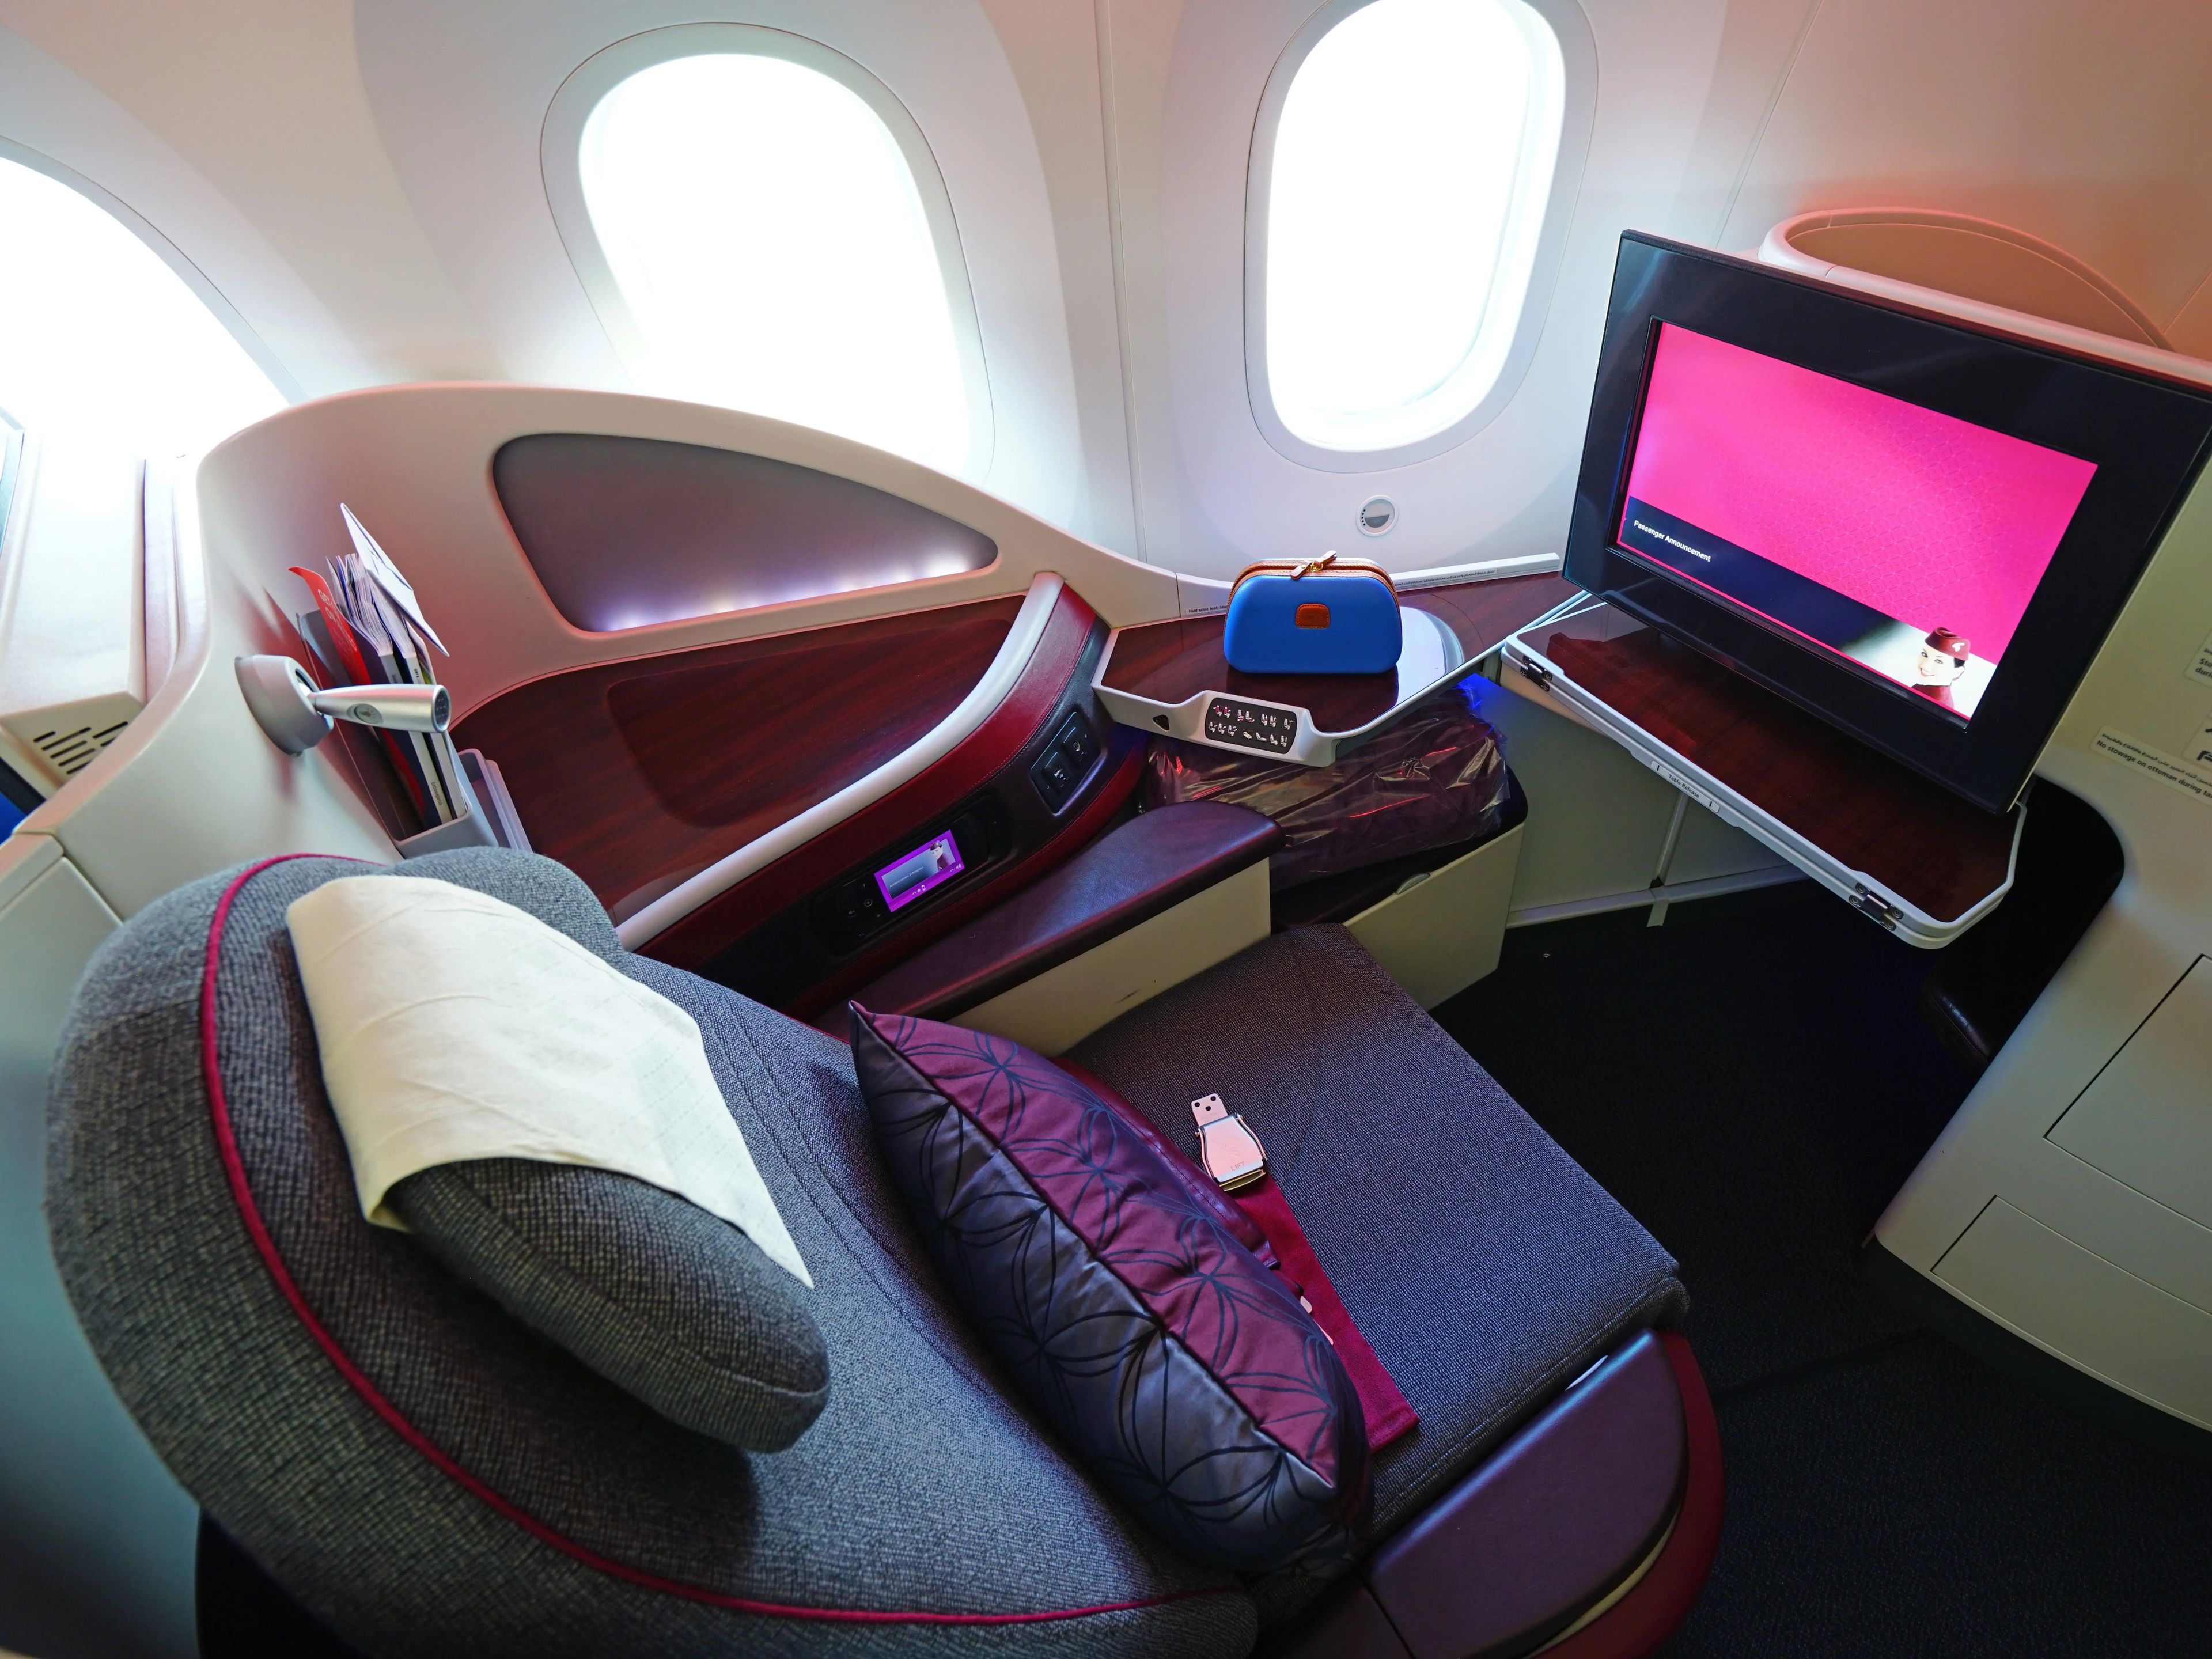 Qatar Airlines first class cabin.